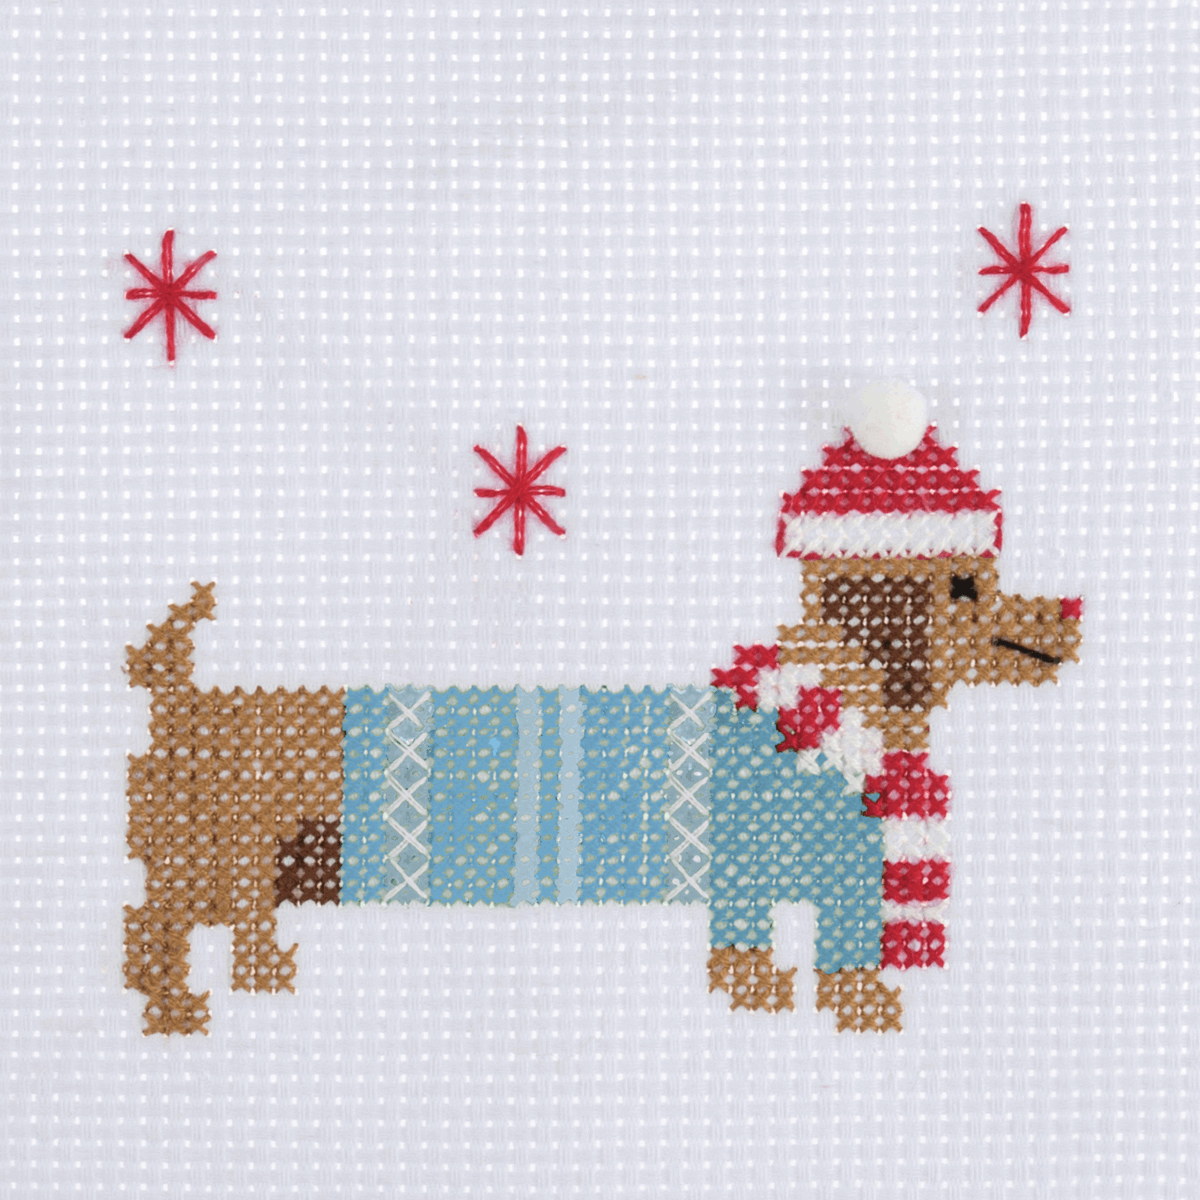 Trimits Make Your Own Cross Stitch Wall Christmas decoration craft kit. Stocking filler.